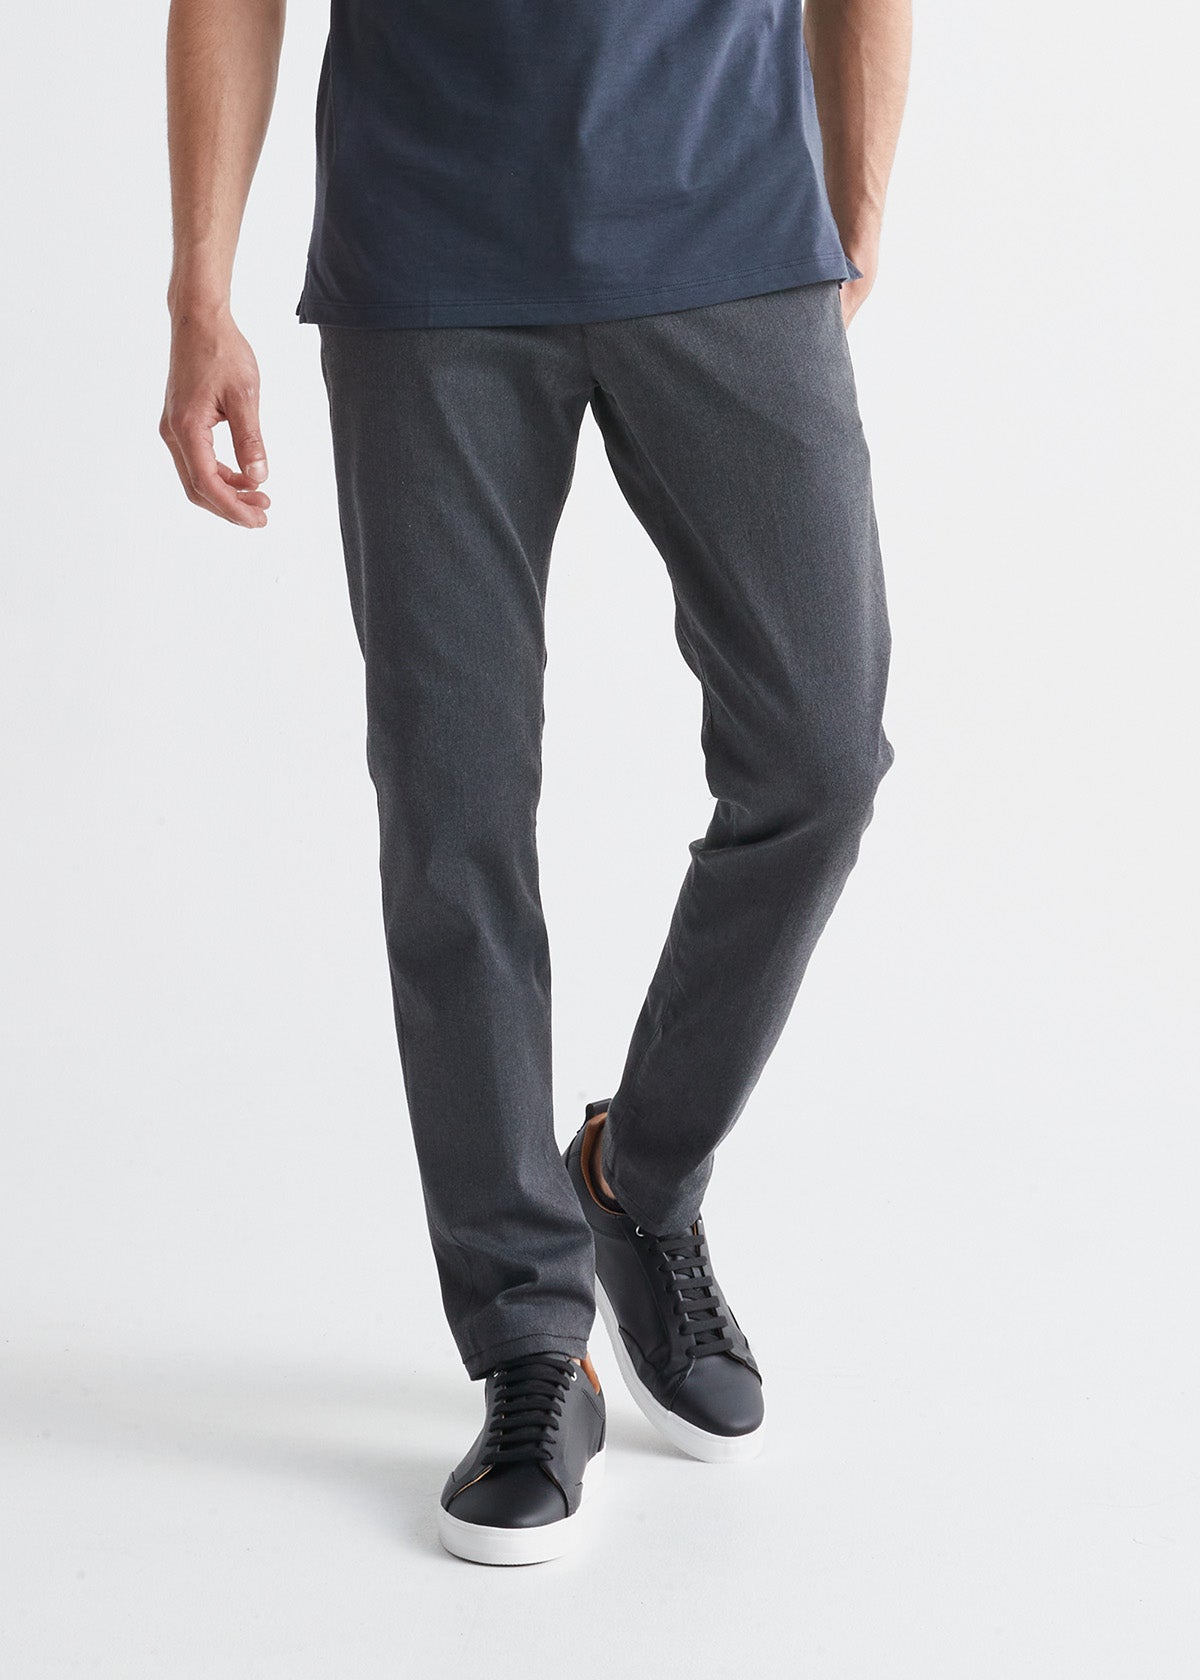 SMART STRETCH SLIM IN CHARCOAL GREY 2946 FT